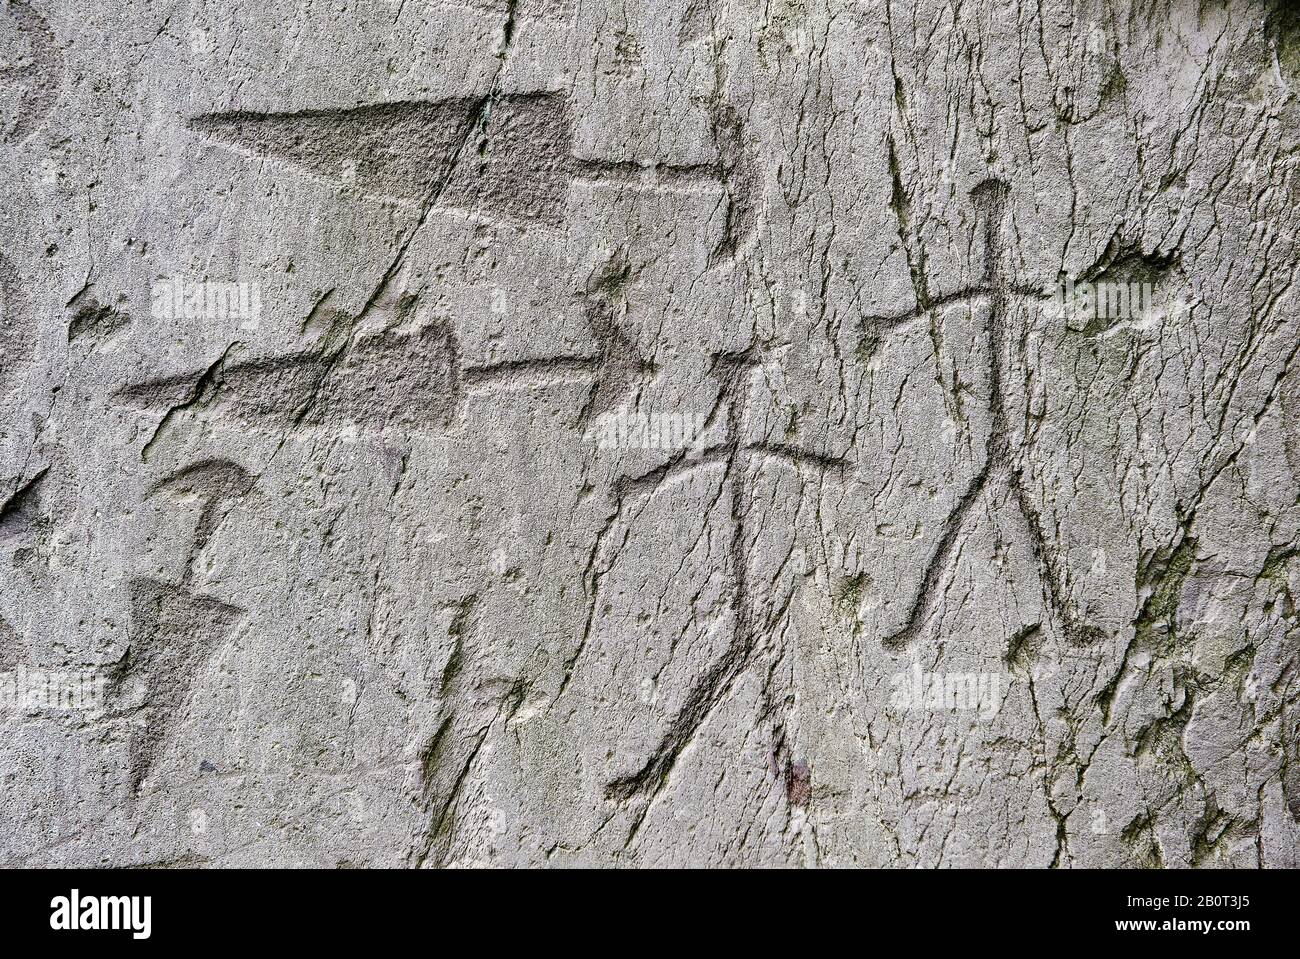 Prehistoric  petroglyphs, rock carvings, detail of of trangular daggers with semi circular pomels and schematic depictions of human figures in an anci Stock Photo